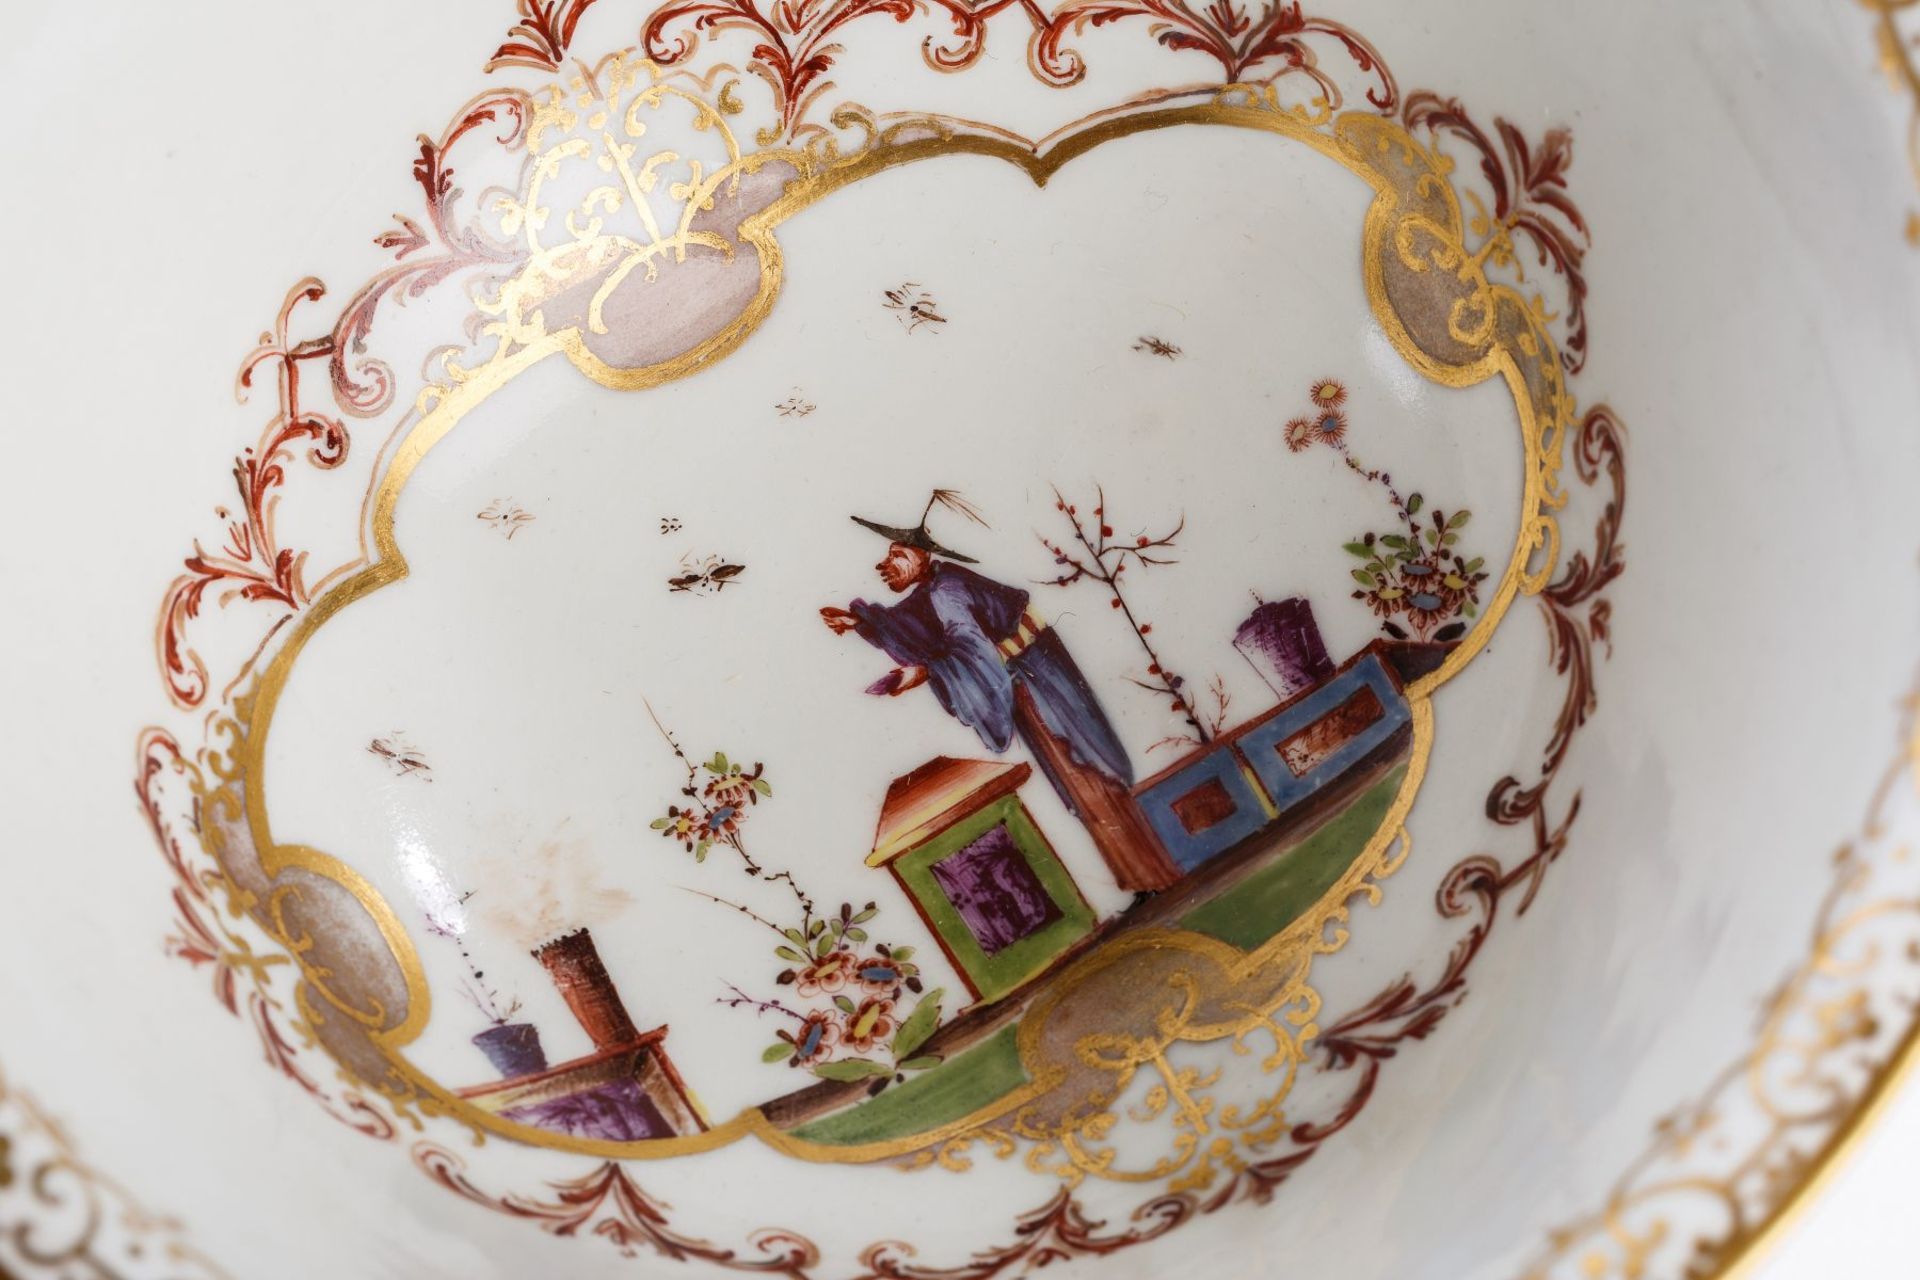 Rare bowl with "Chinoiserie" scenes, Meissen 1723/25 - Image 2 of 4